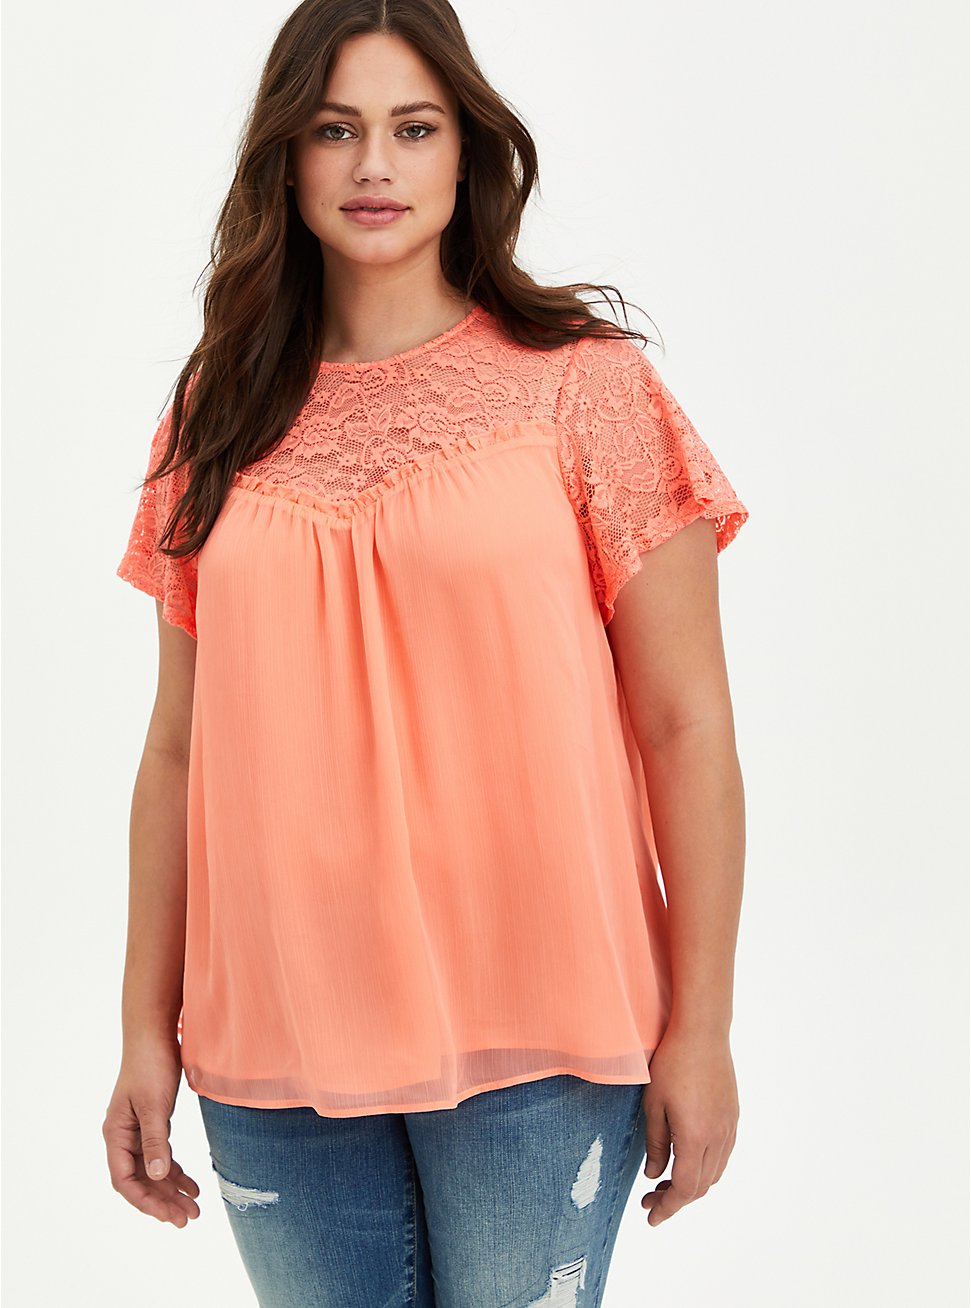 Coral Crinkle Chiffon Lace Blouse, FUSION CORAL, hi-res